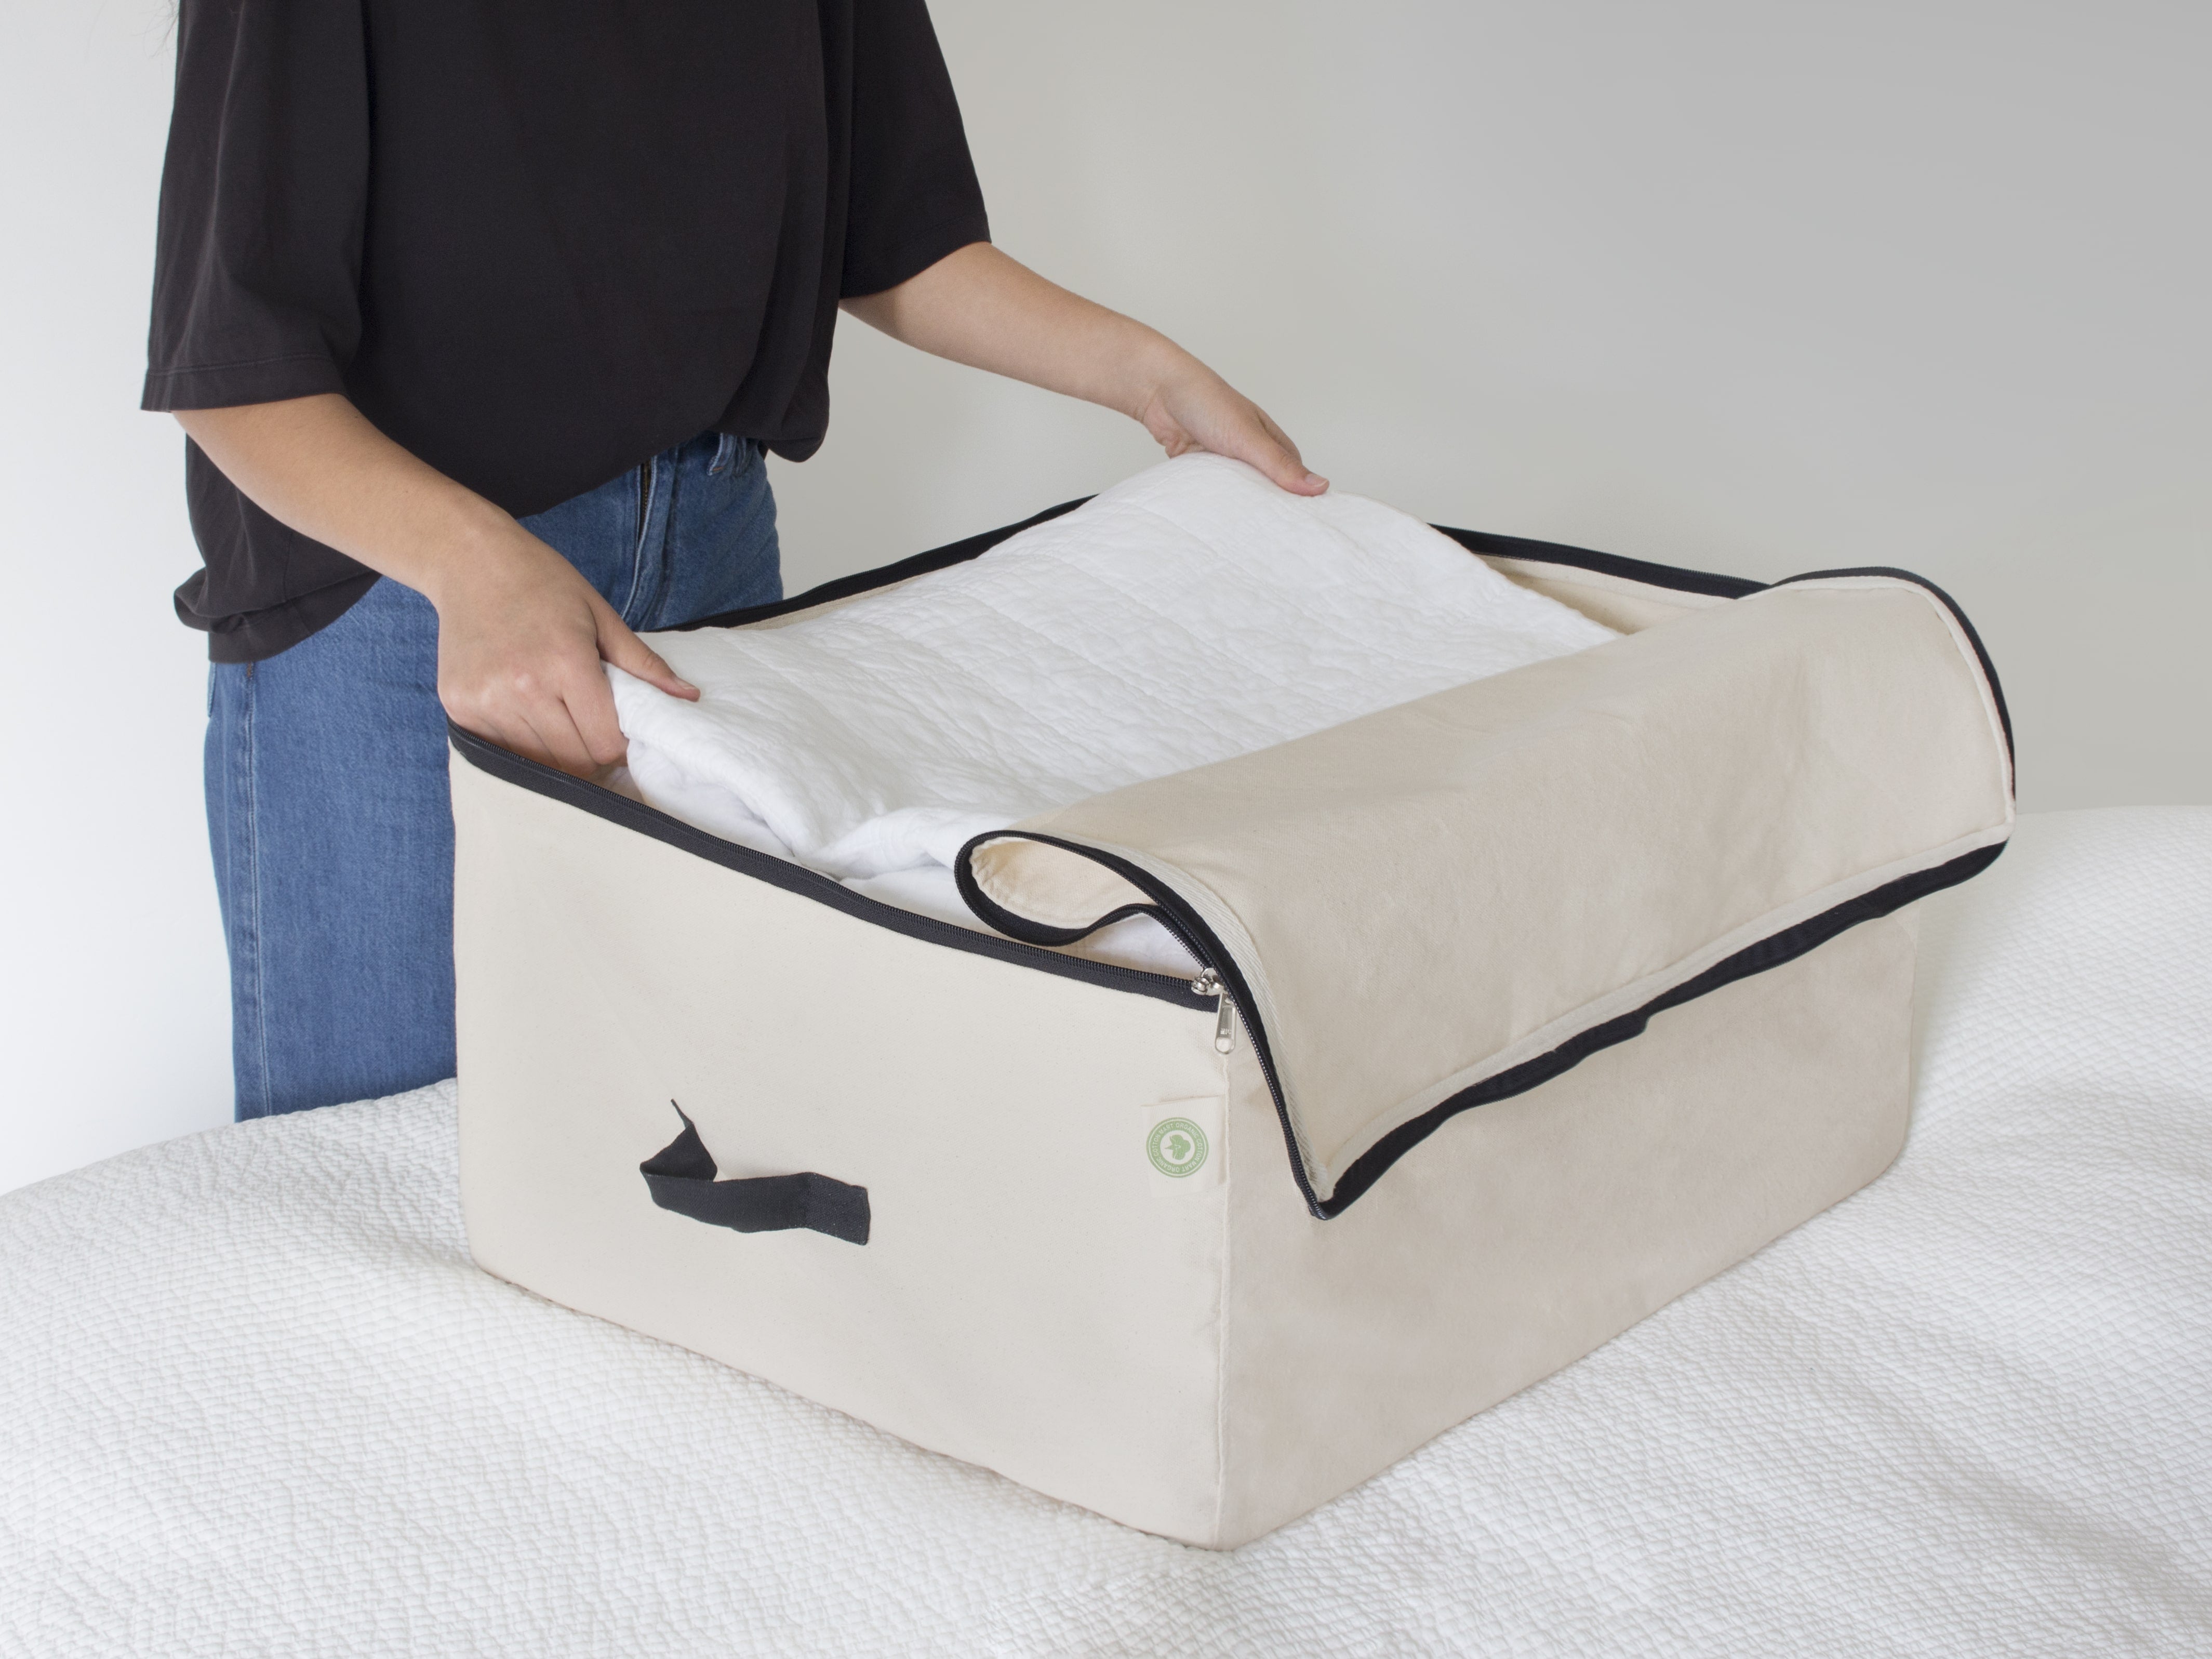 Wholesale bedding storage bags to Save Space and Make Storage Easier 